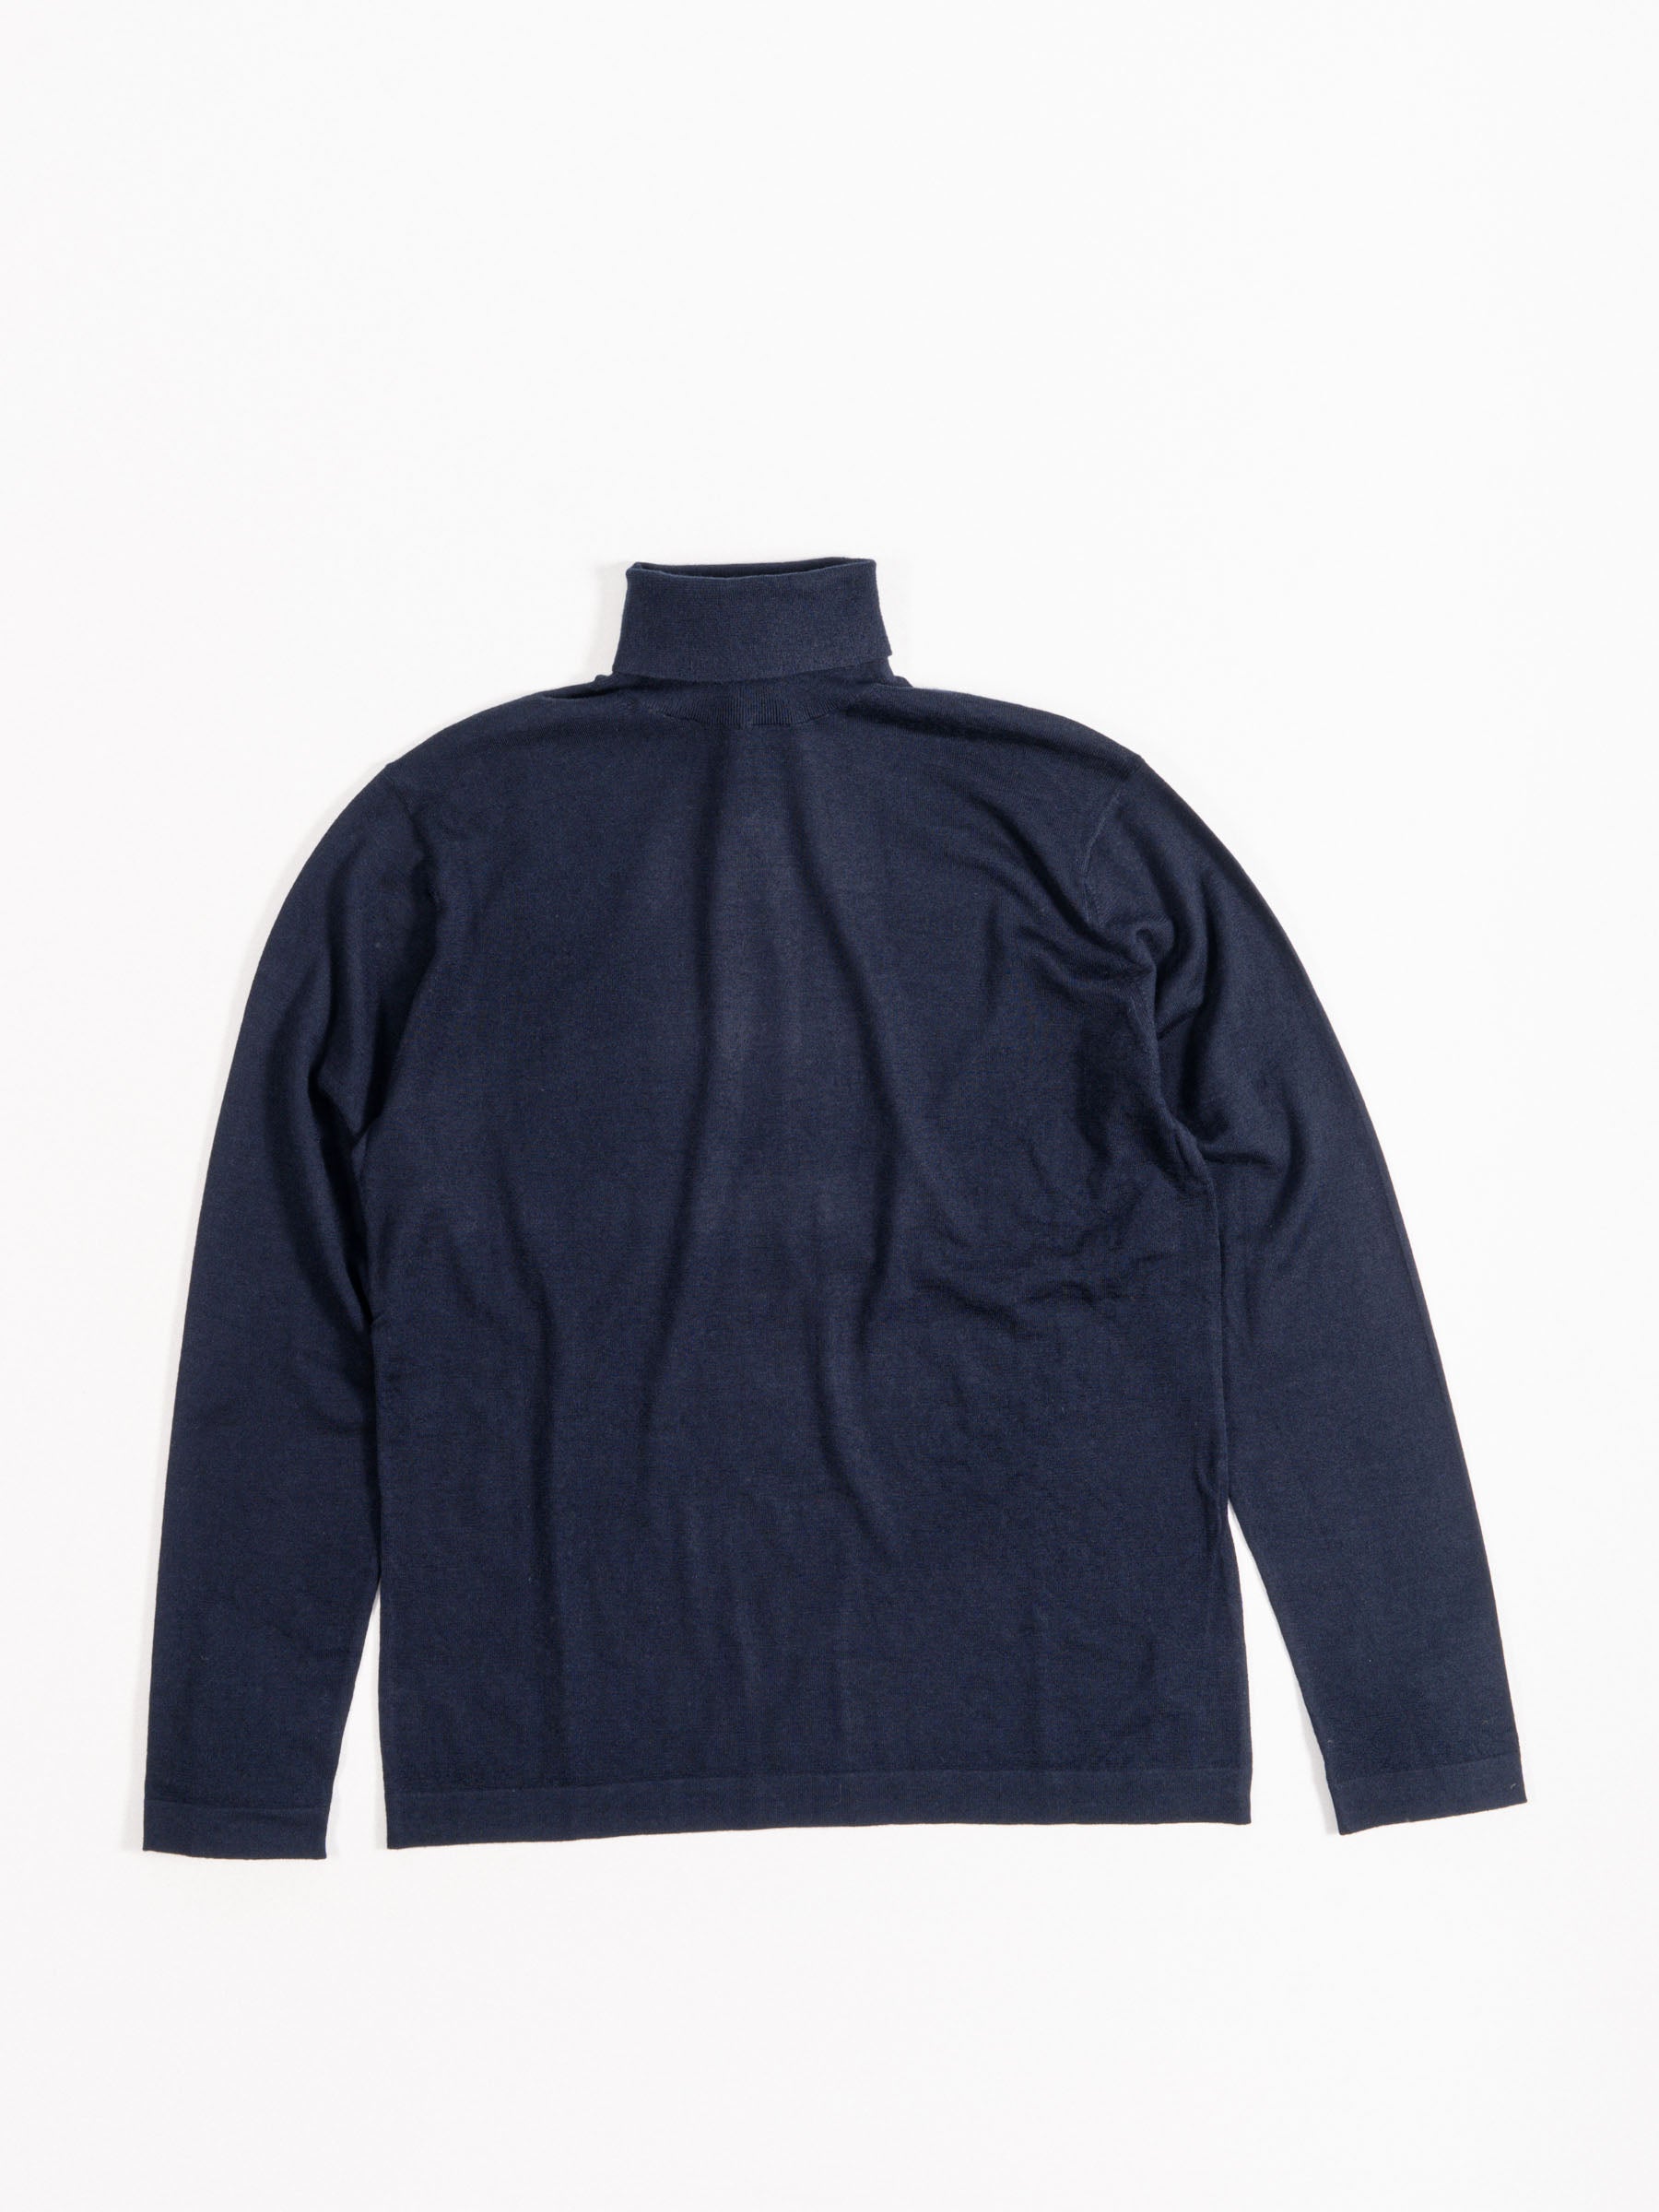 Wool Classic Rollerneck Sweater Navy Blue